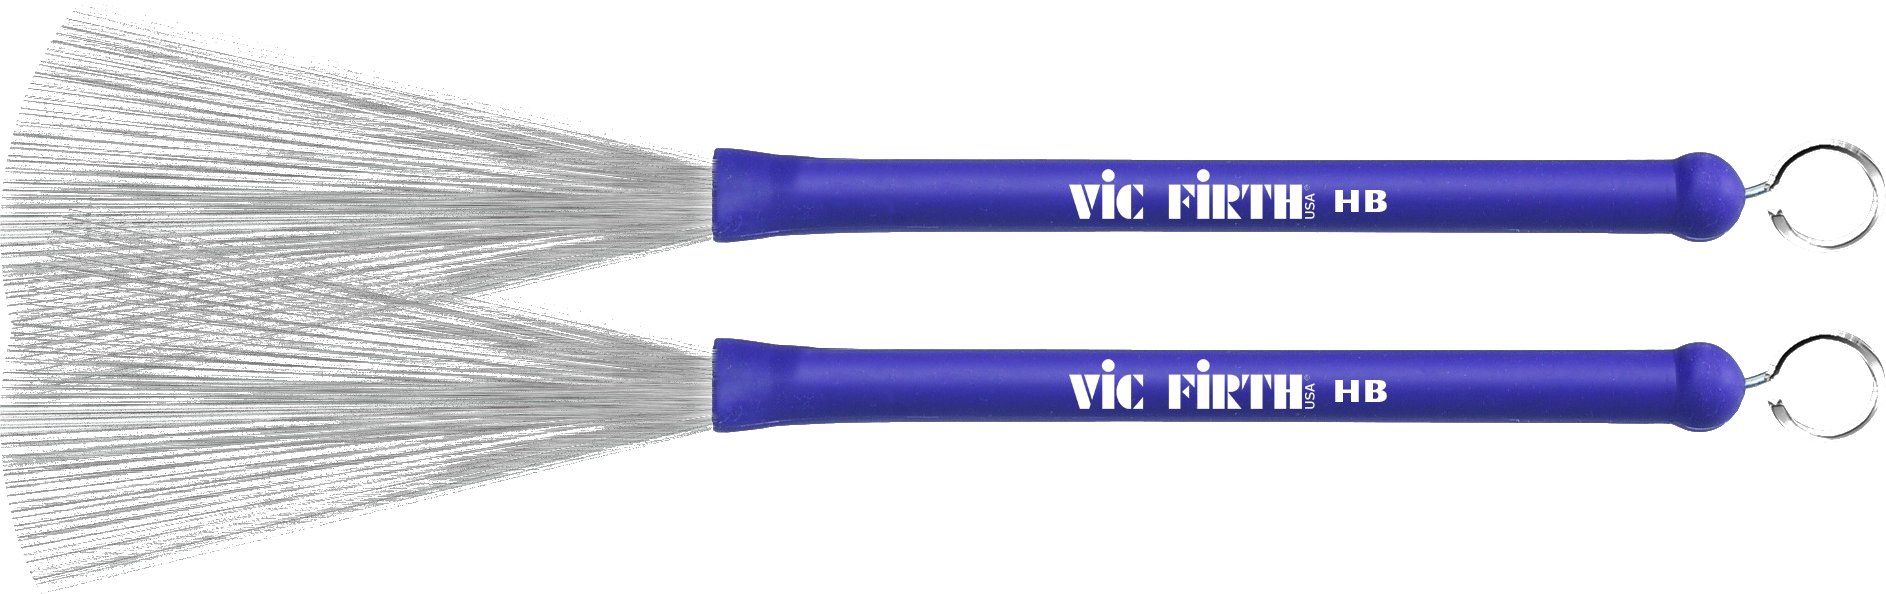 Vic-Firth-Heritage-Brushes